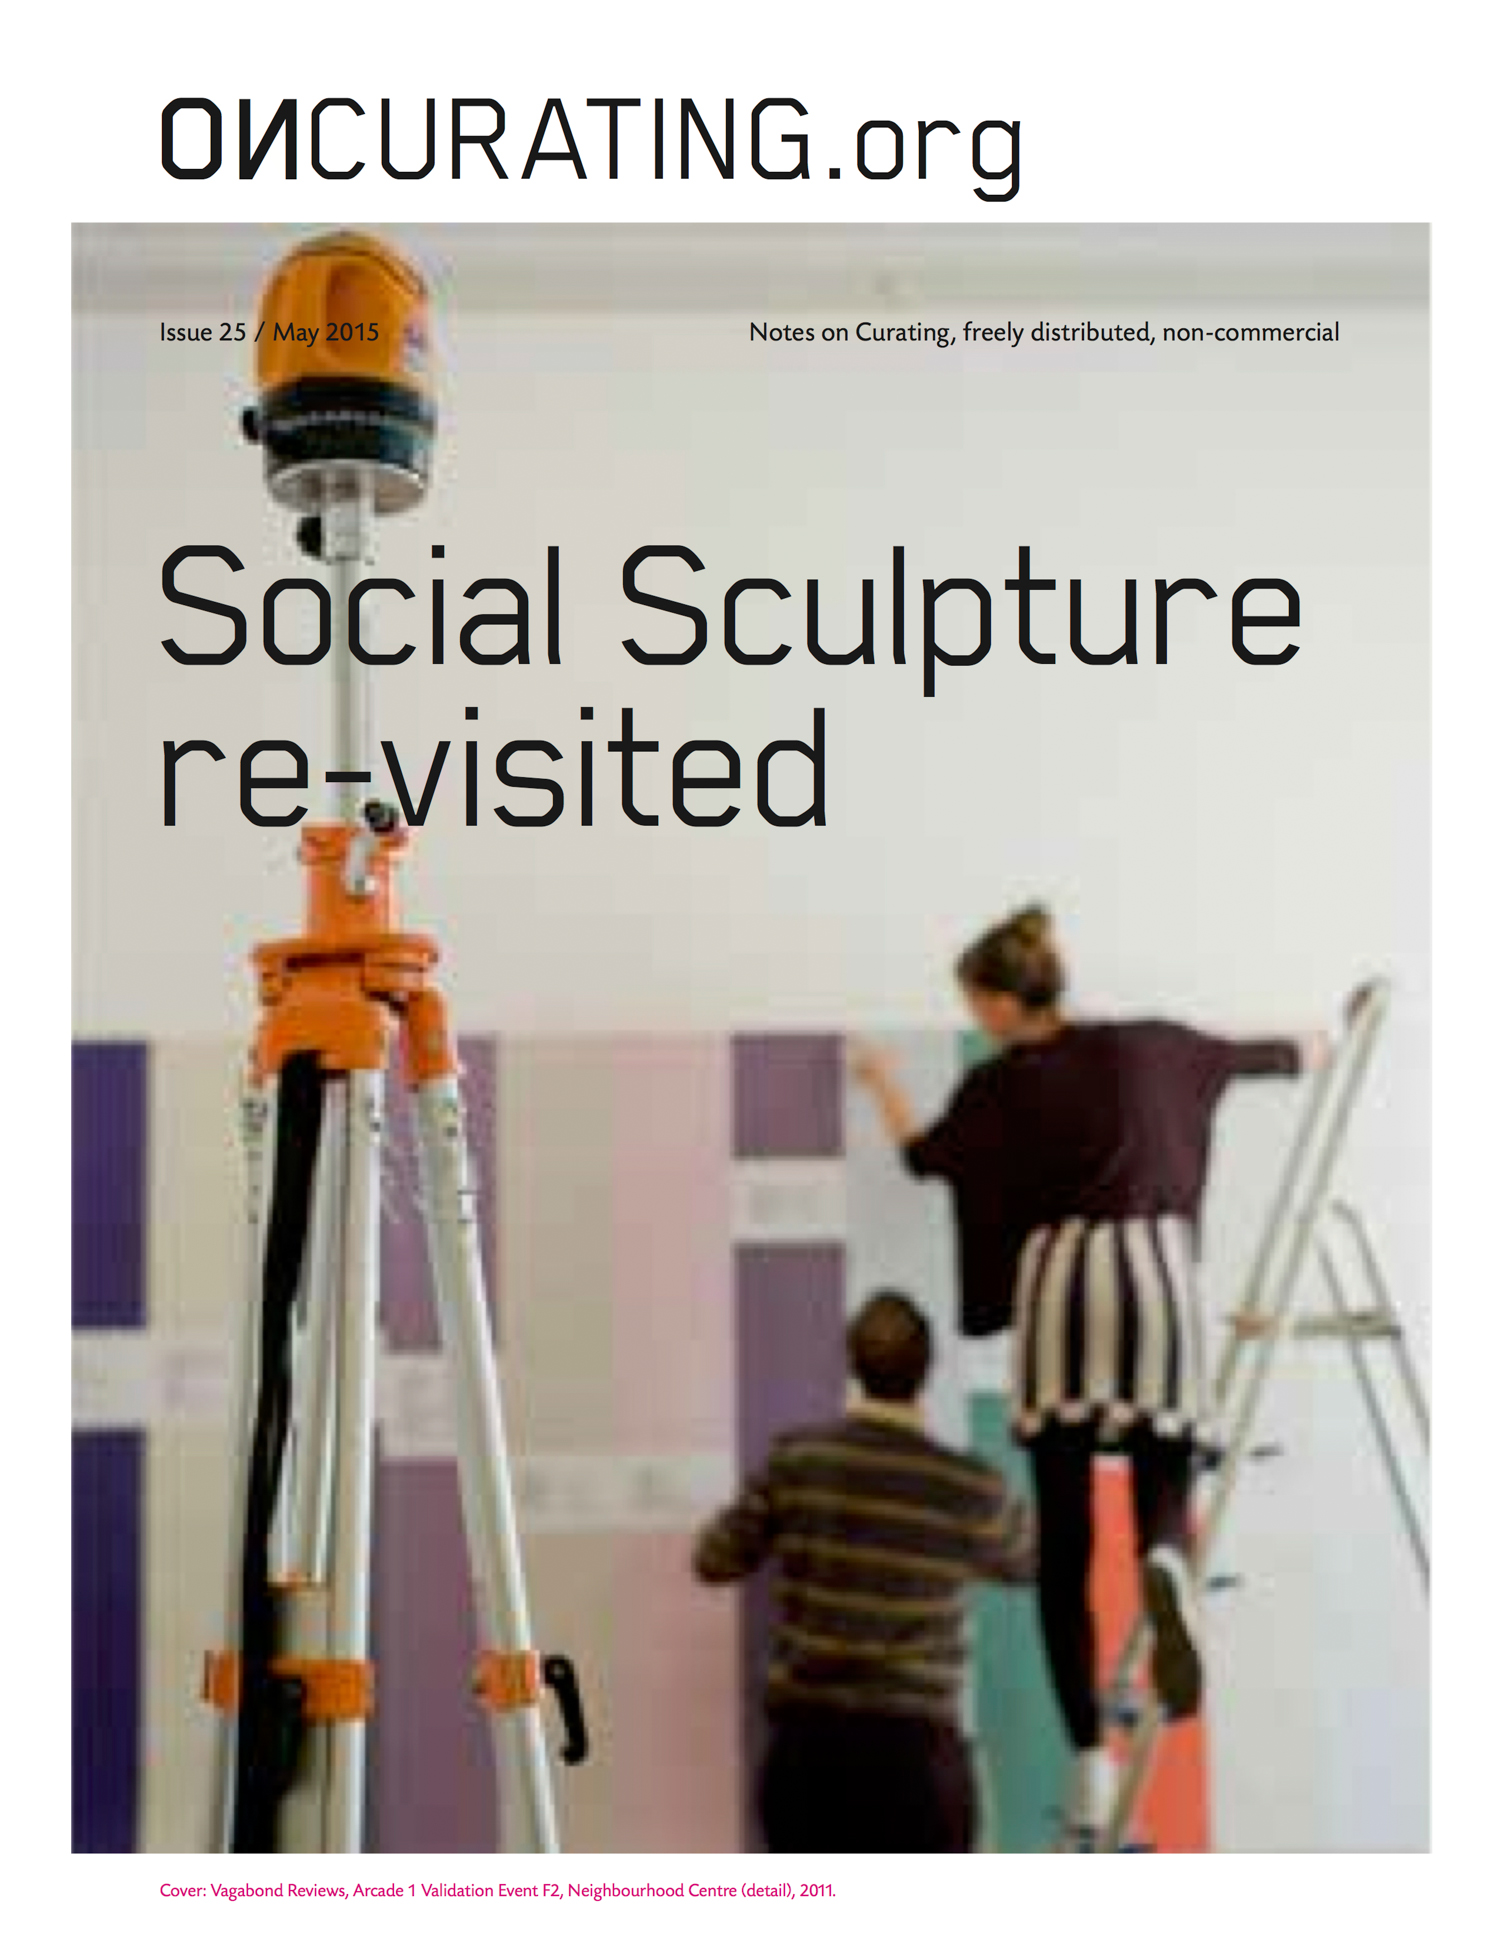 On Curating.org, Cover, 2015